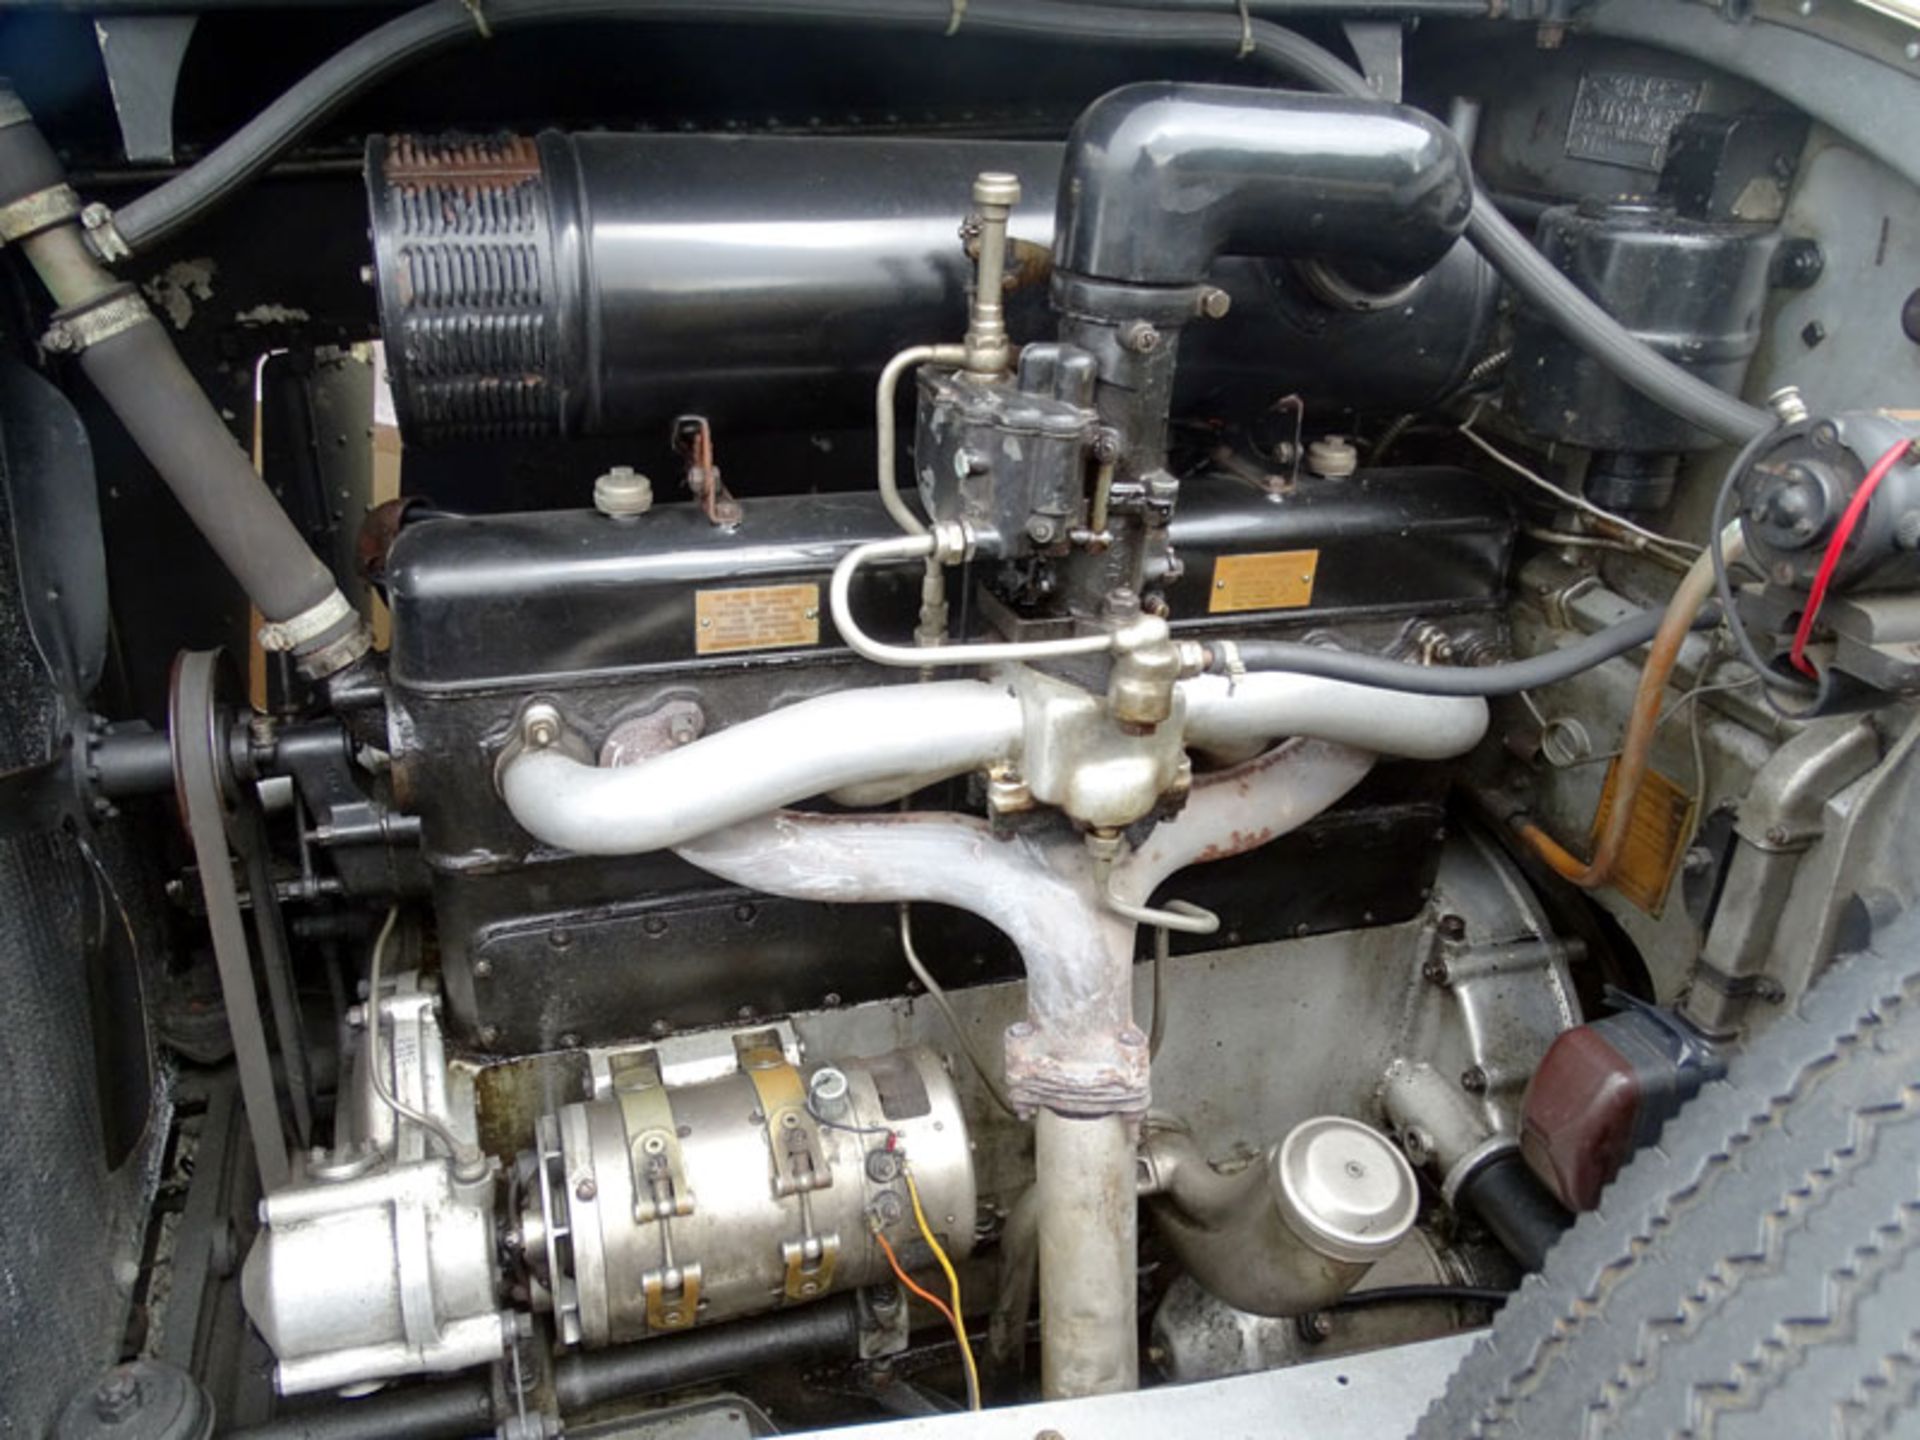 1935 Rolls-Royce 25/30 Saloon with Division - Image 7 of 12